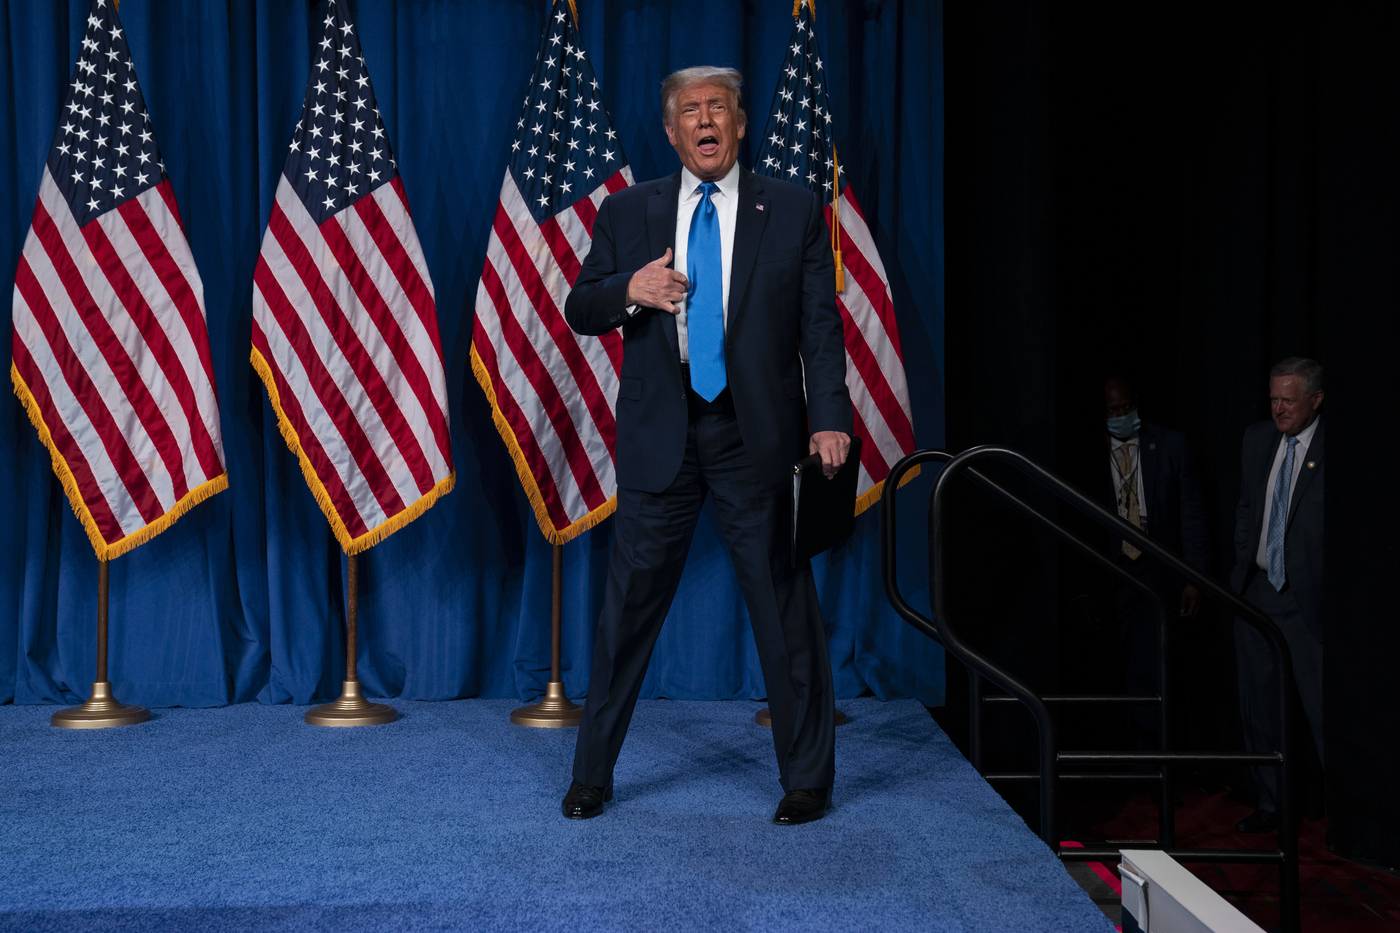 President Donald Trump arrives to speak at Republican National Committee convention, Monday, Aug. 24, 2020, in Charlotte. (AP Photo/Evan Vucci)